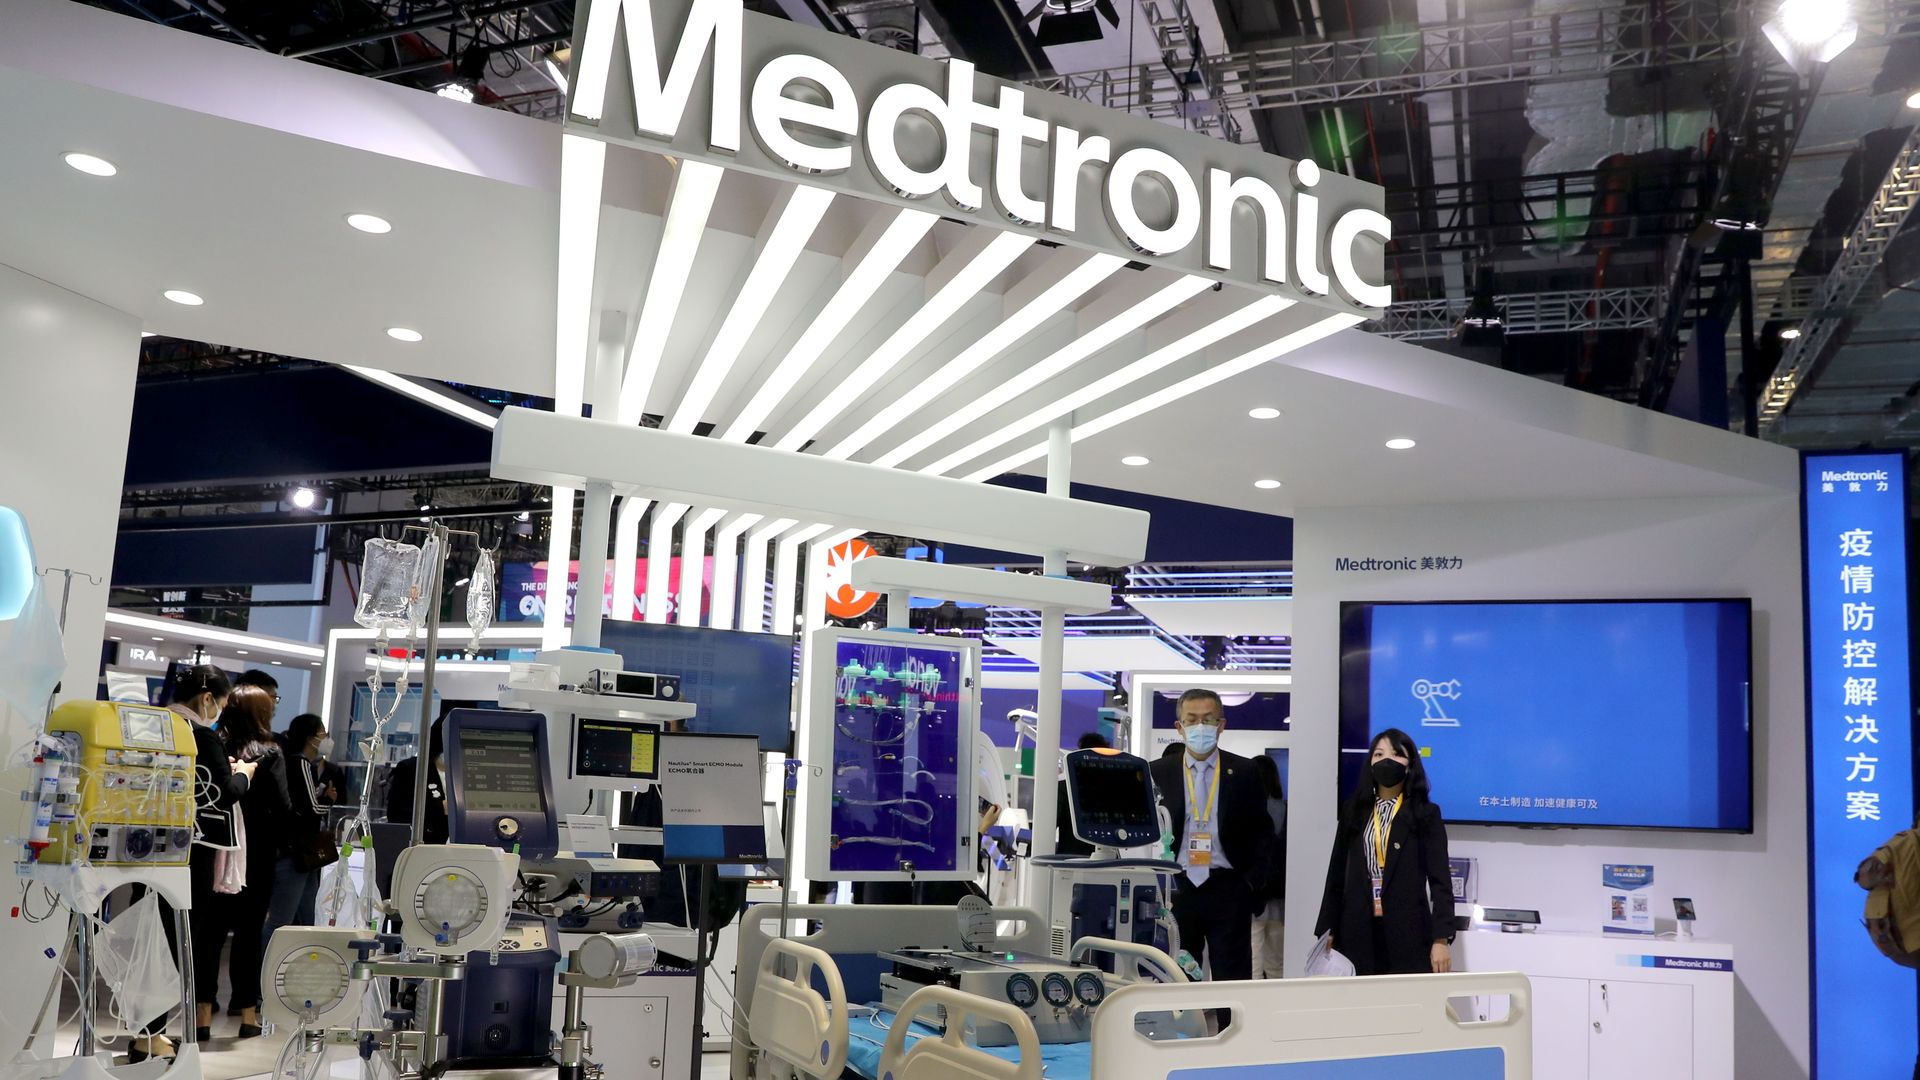 The Medtronic logo sits above a display of its medical devices and products at a trade show.